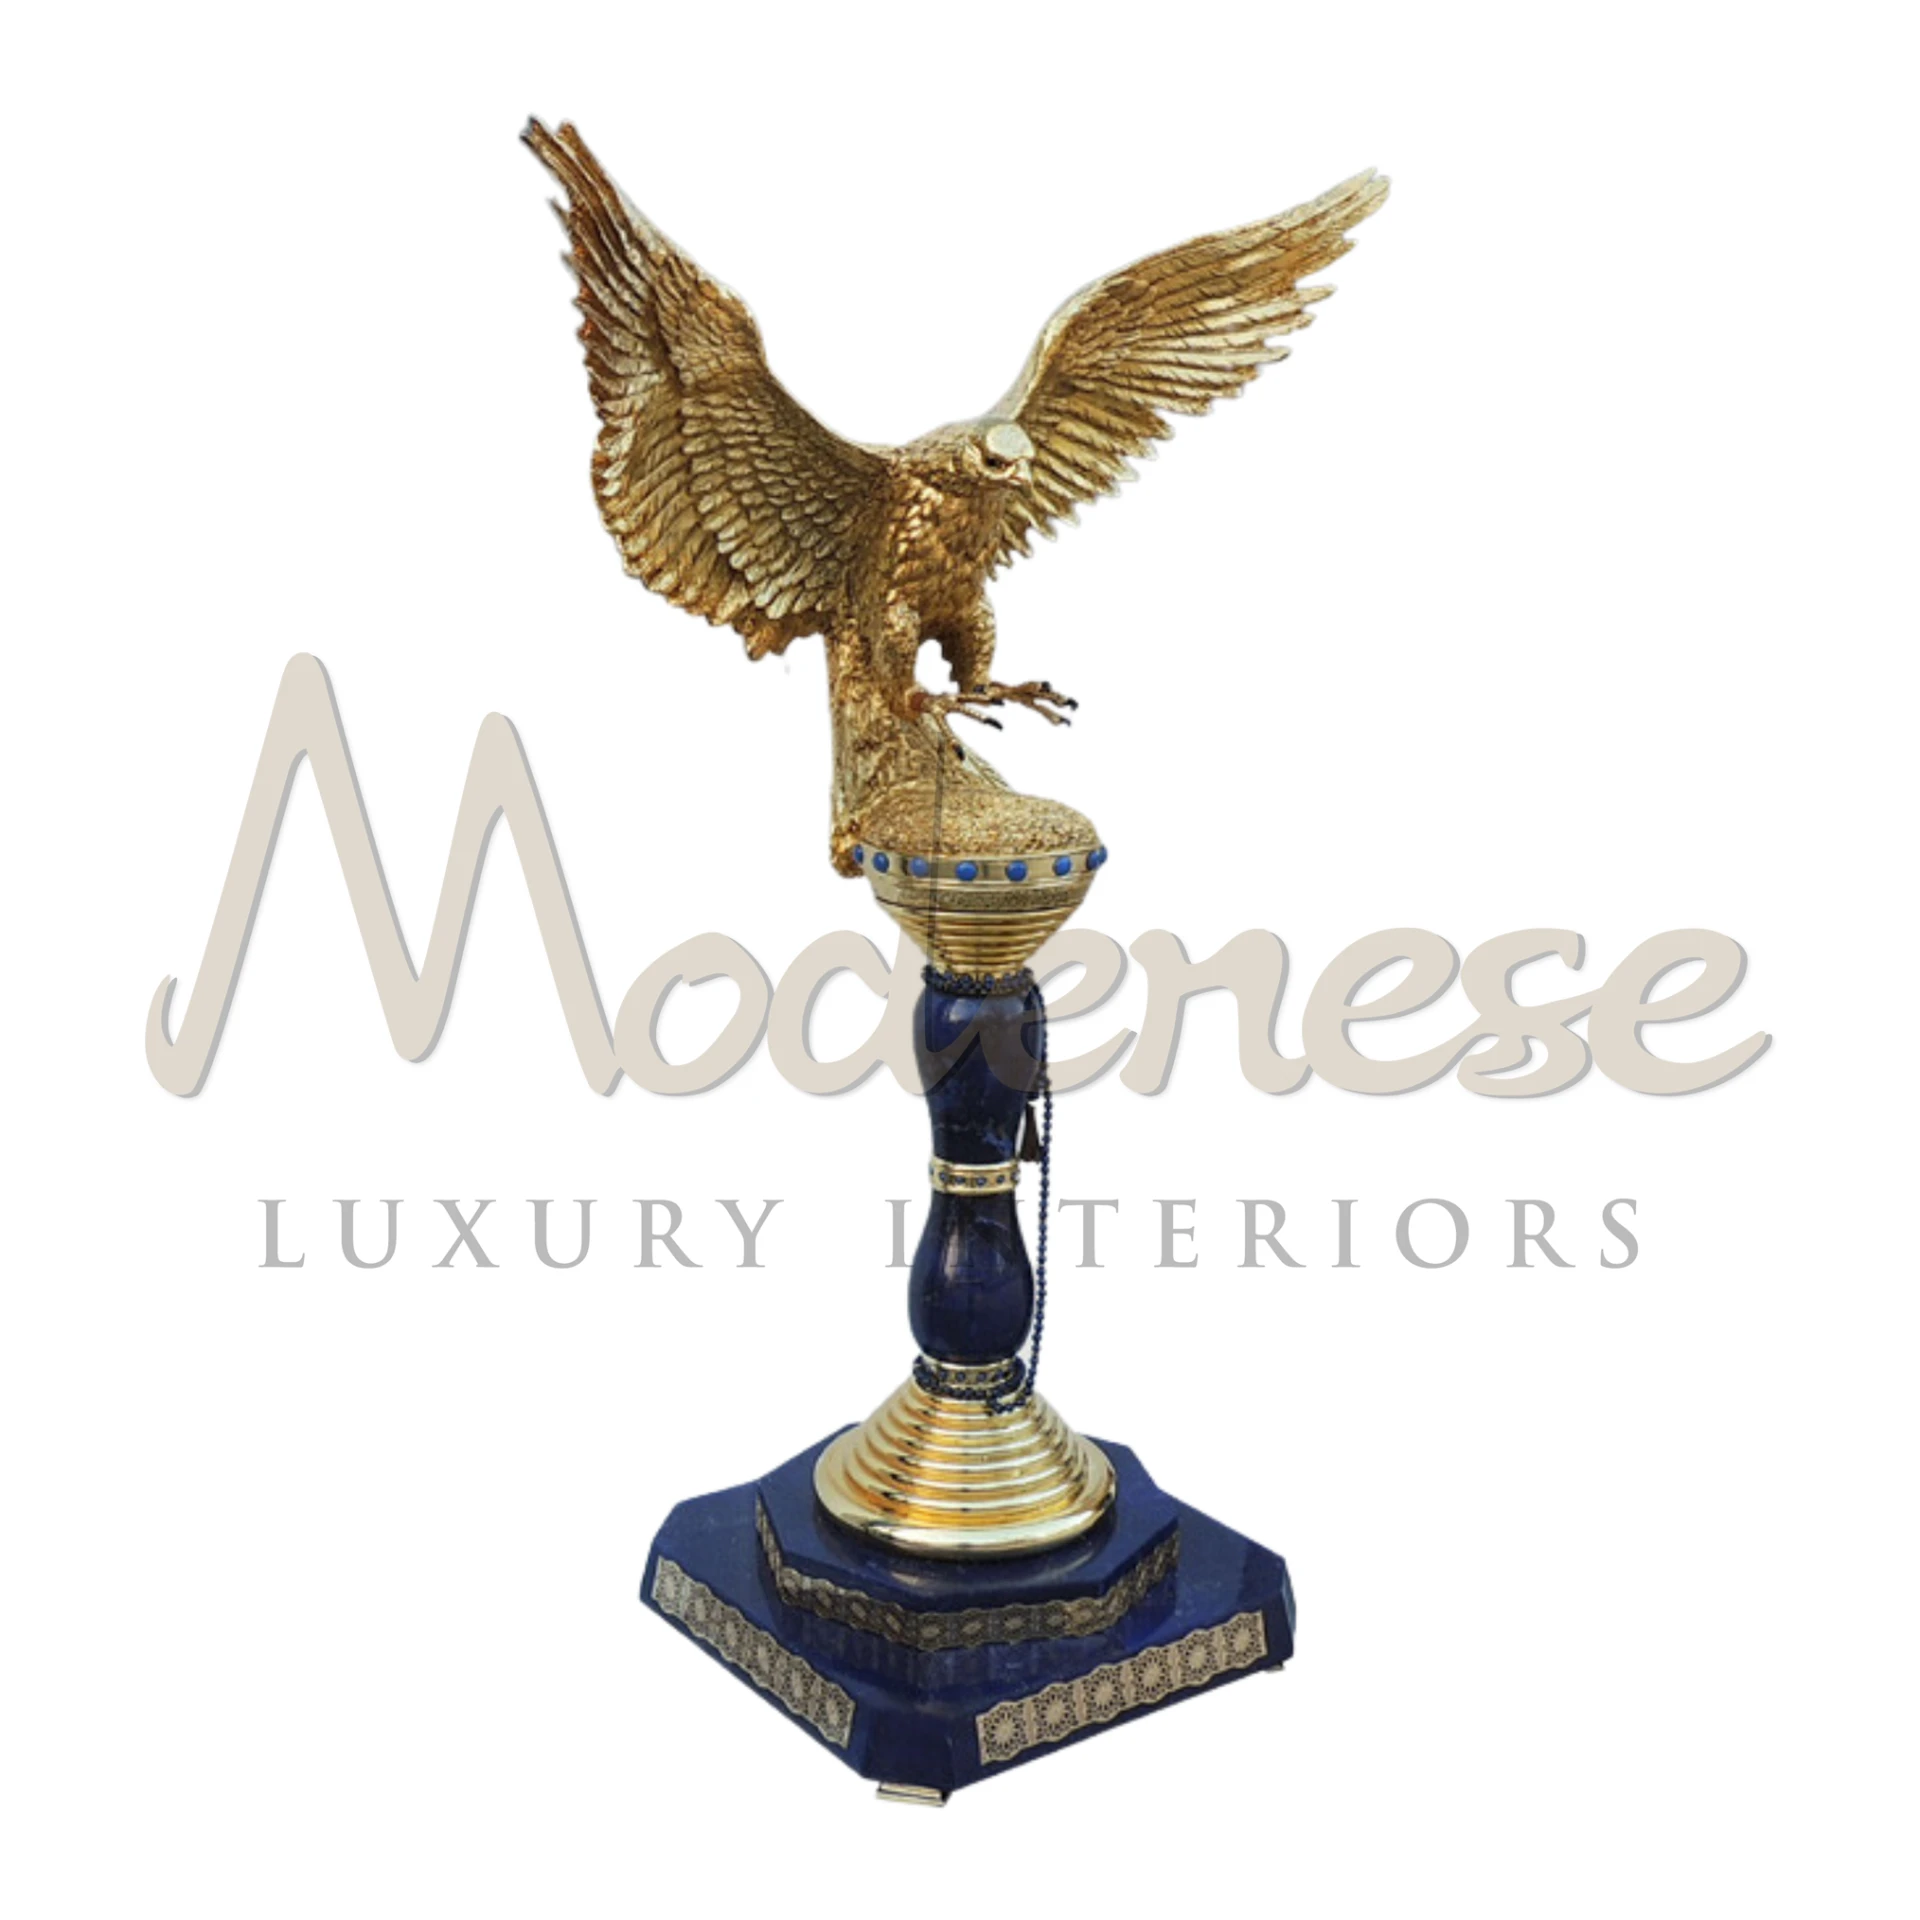 Imperial Pedestal Falcon statuette, a commanding and elegant decorative piece, ideal for adding luxury to any classic style interior.